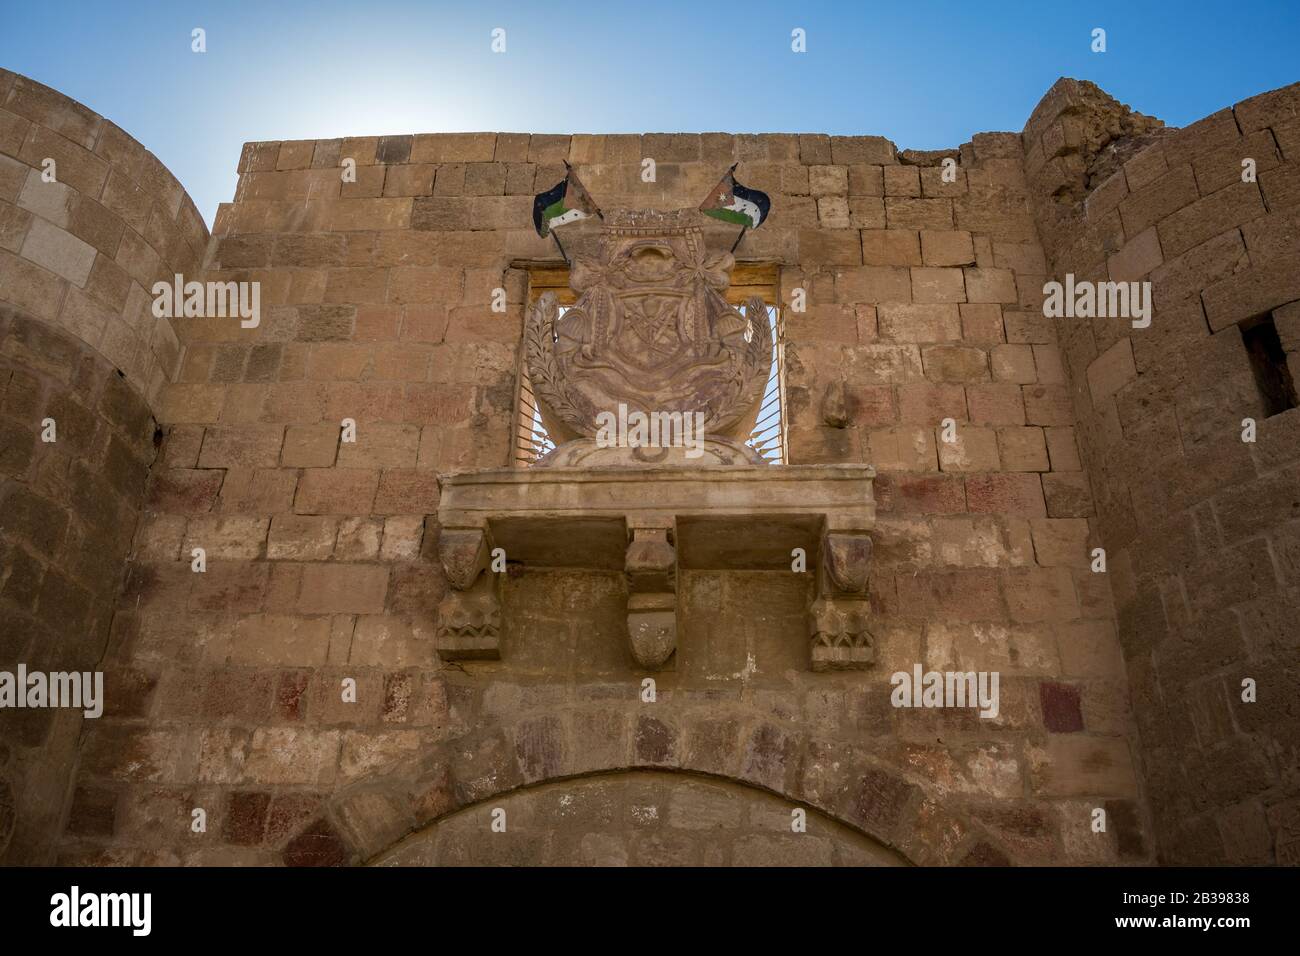 Jordan, Aqaba, street view from the front gate of Aqaba Castle with coat of arms with two Jordanian flags above the main fortress gate. Sunny winter day Stock Photo